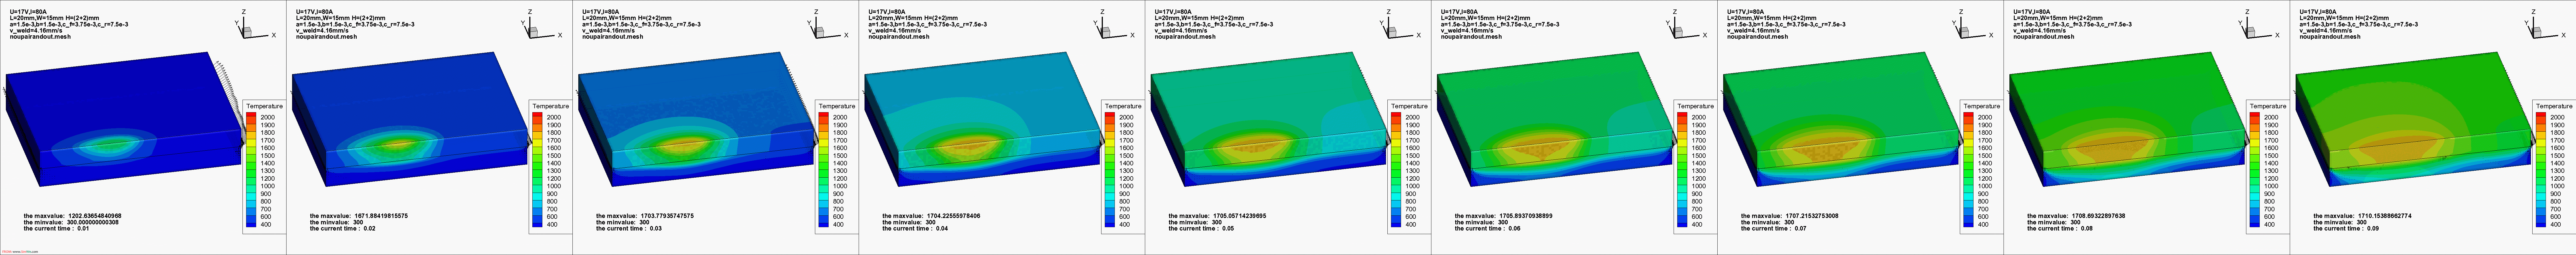 ansys13.0_temper.gif